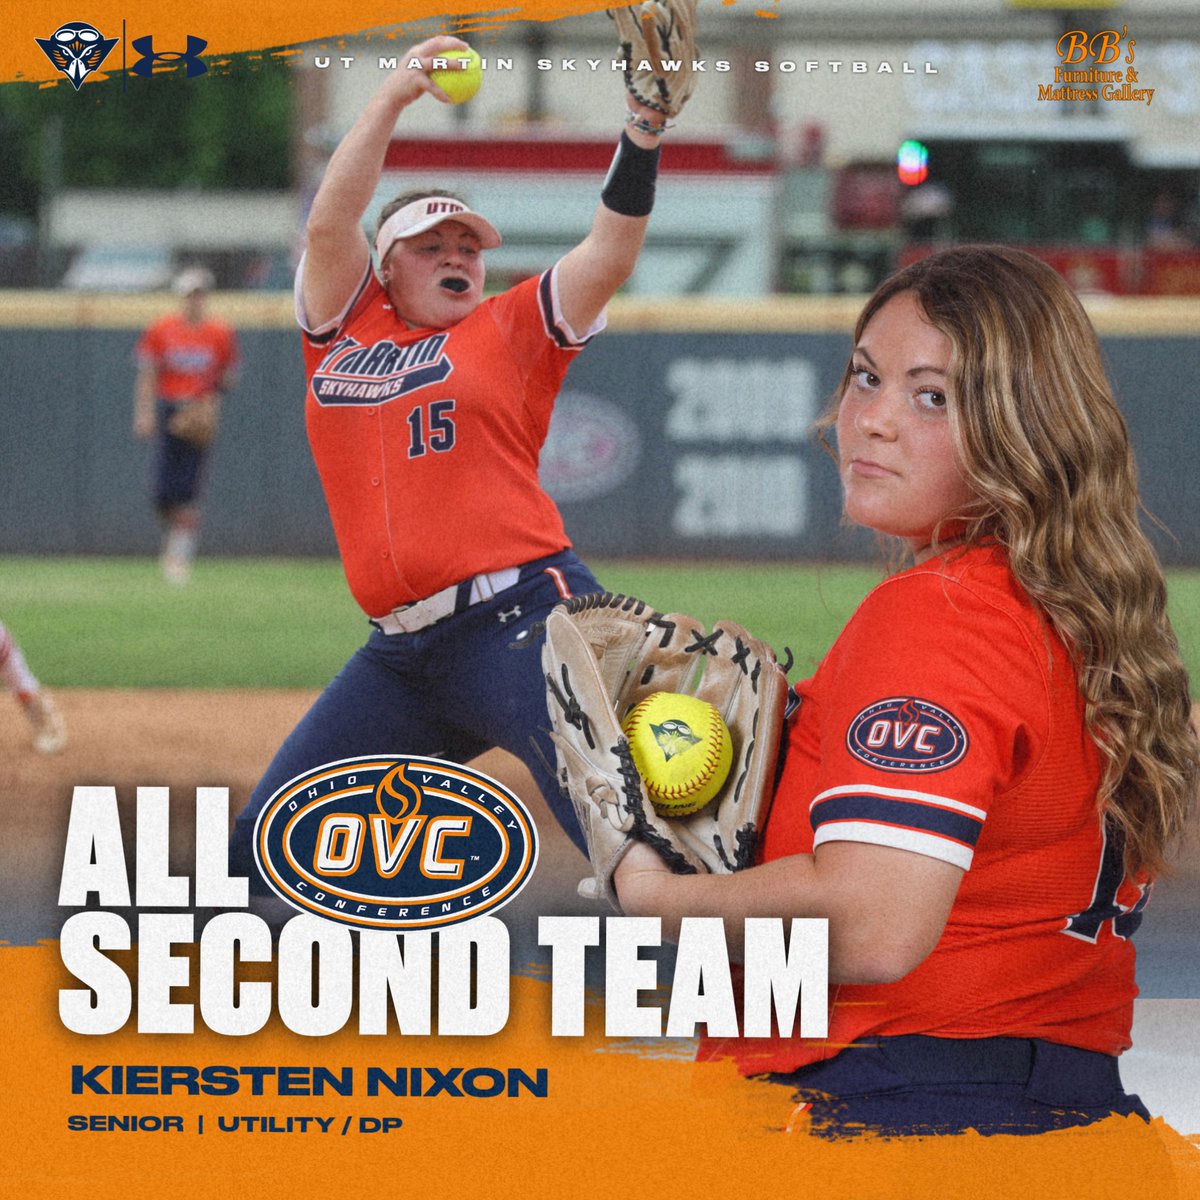 Congratulations to @UTMSoftball senior utility/DP Kiersten Nixon on earning an All-OVC second team selection! 🥎 .303 average | 5 2Bs | 2 HR | 14 RBIs 🥎 8-1 with 1.55 ERA in OVC play Story: tinyurl.com/5b6zctub #MartinMade | #OVCit